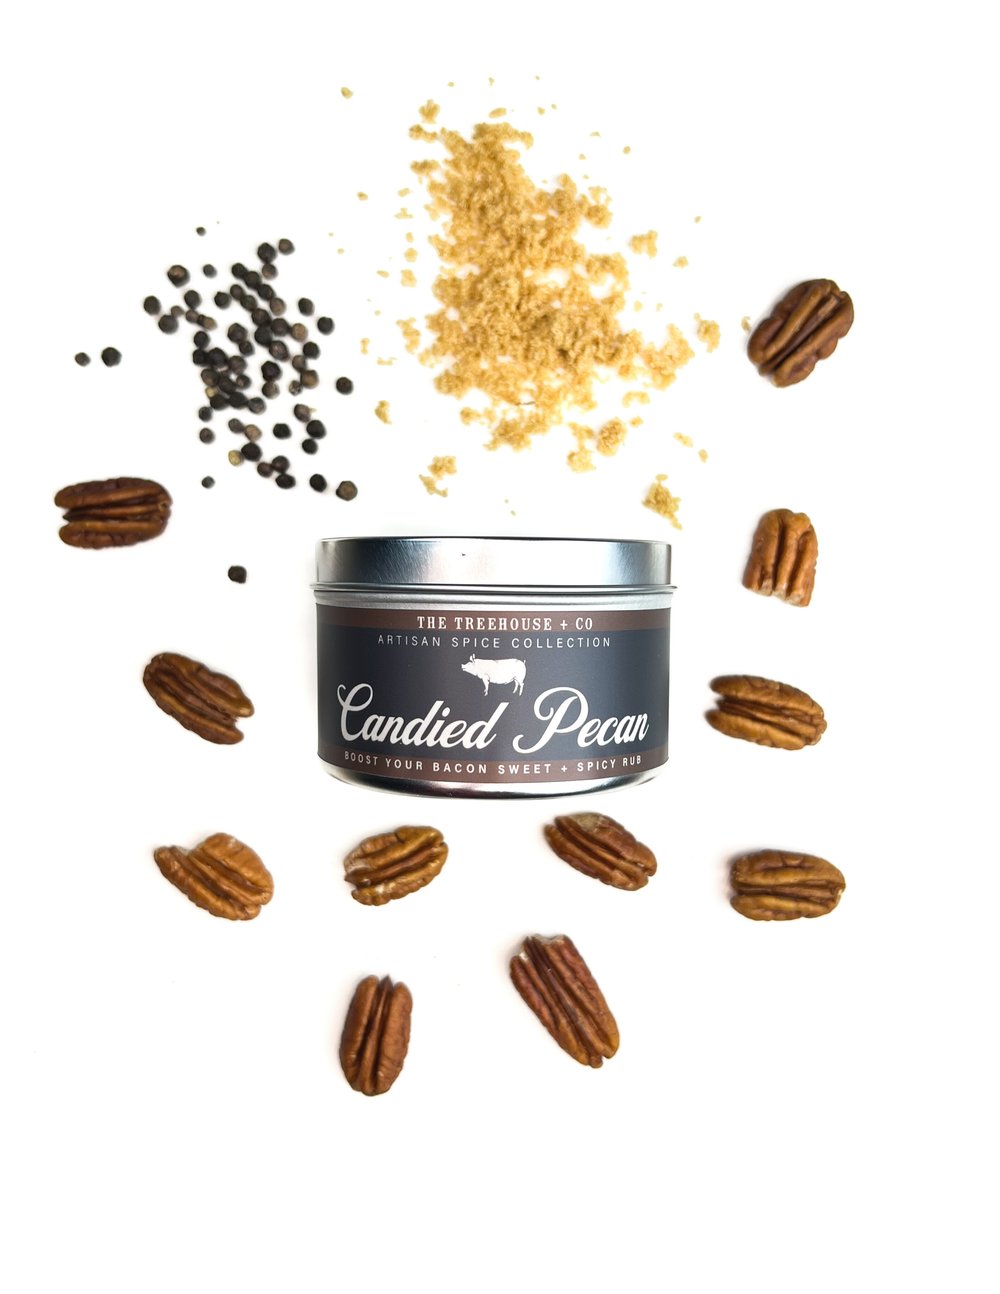 The Treehouse and Co Artisan Spice Collection - Provisions, LLC